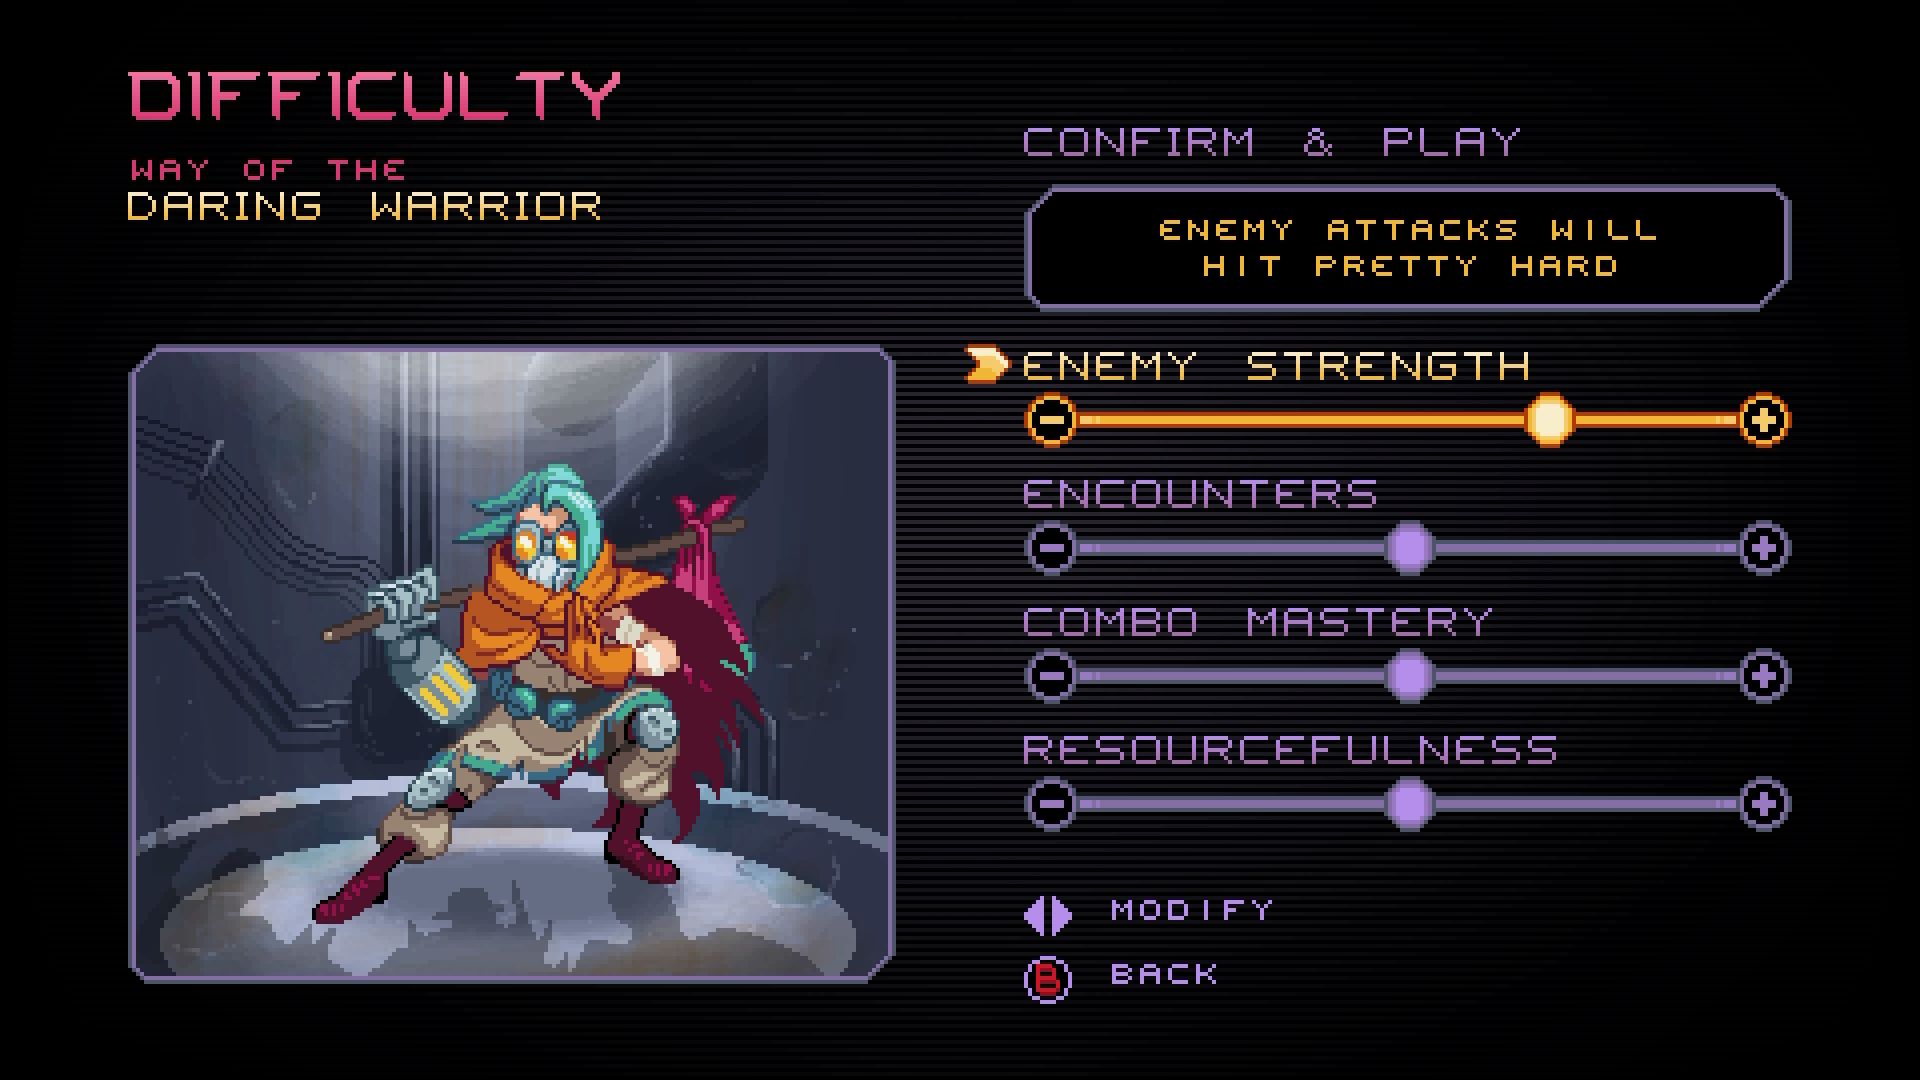 A screenshot of the difficulty menu in Way of the Passive Fist. The menu presents adjustable sliders for enemy strength, encounters, combo mastery, and resourcefulness.